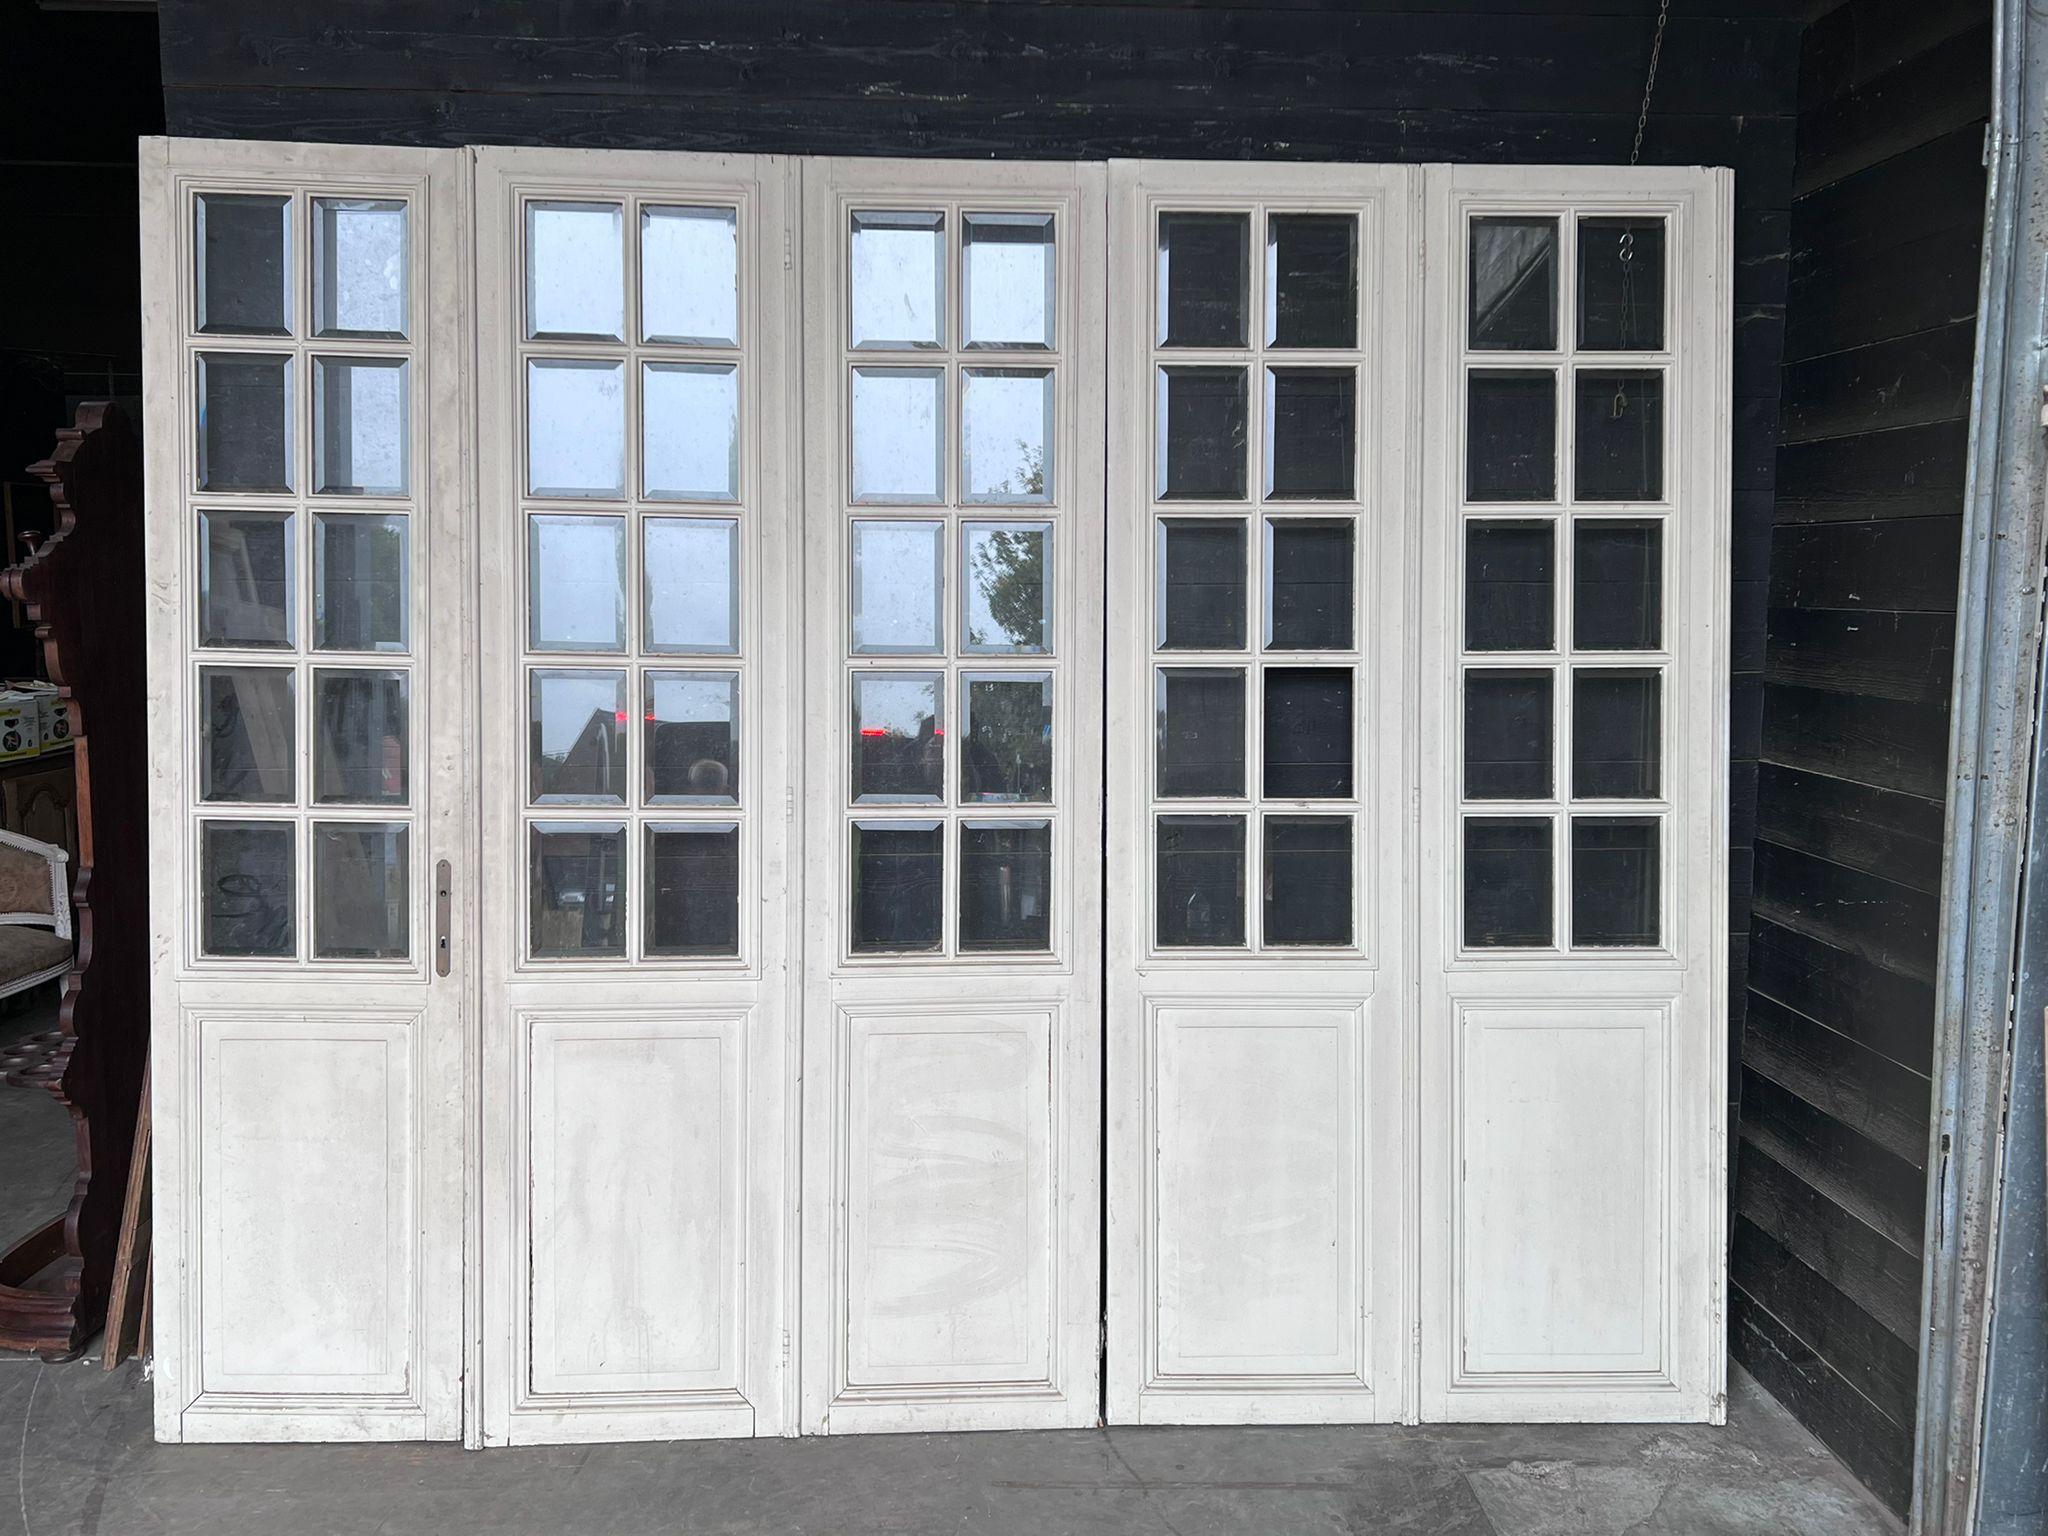 A lovely set of 5 French 19th century Chateau doors, from a Chateau in the Loire region. Having bevelled glass but note one square missing. The other side of the doors is brown.
Measures: height 275 cm
width 340 cm.